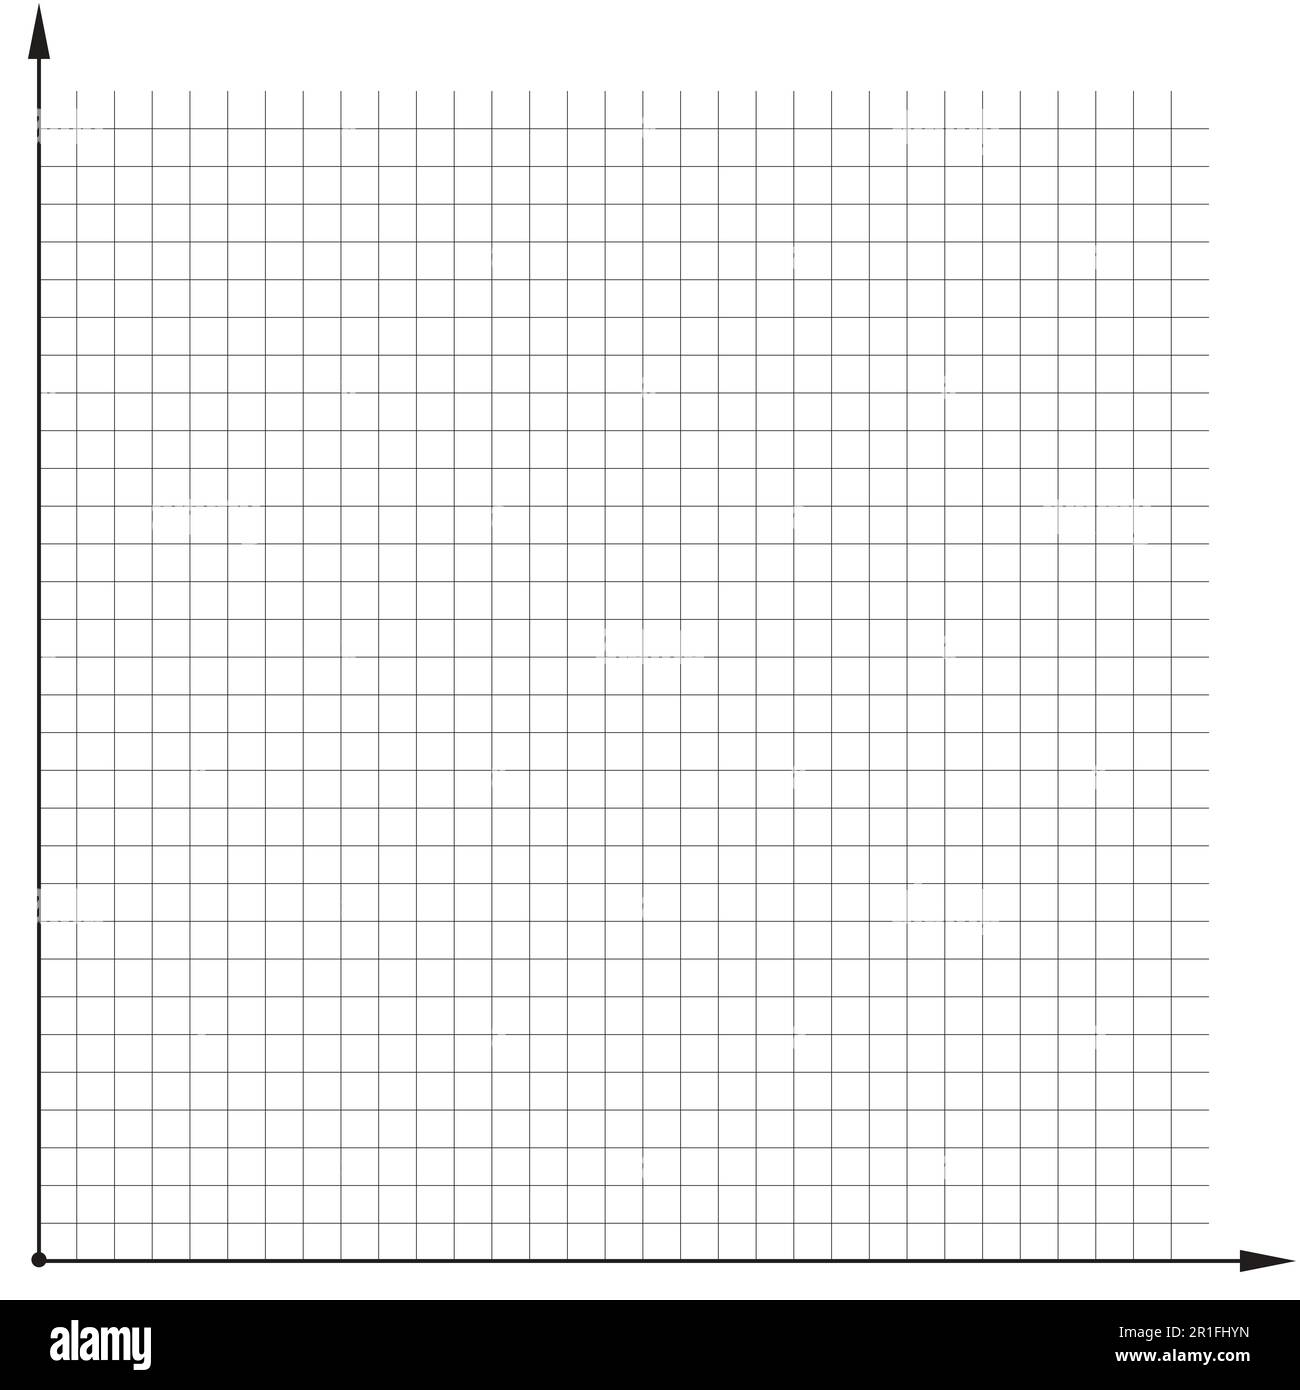 coordinate grid template chart to analyze the chart Stock Vector